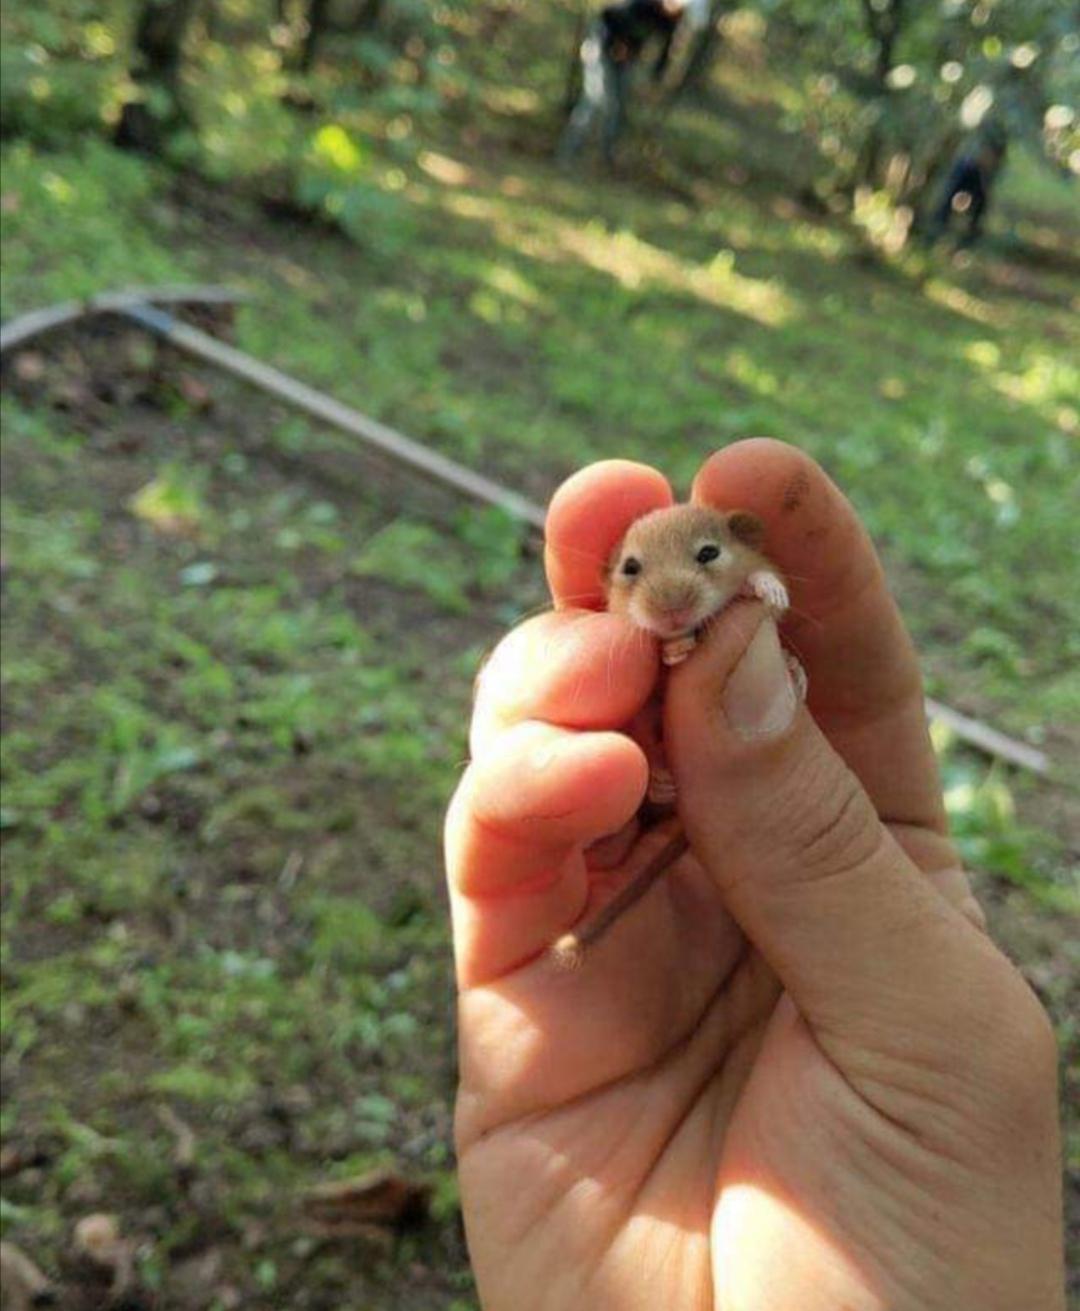 tiny baby hamster being held by someone's fingers